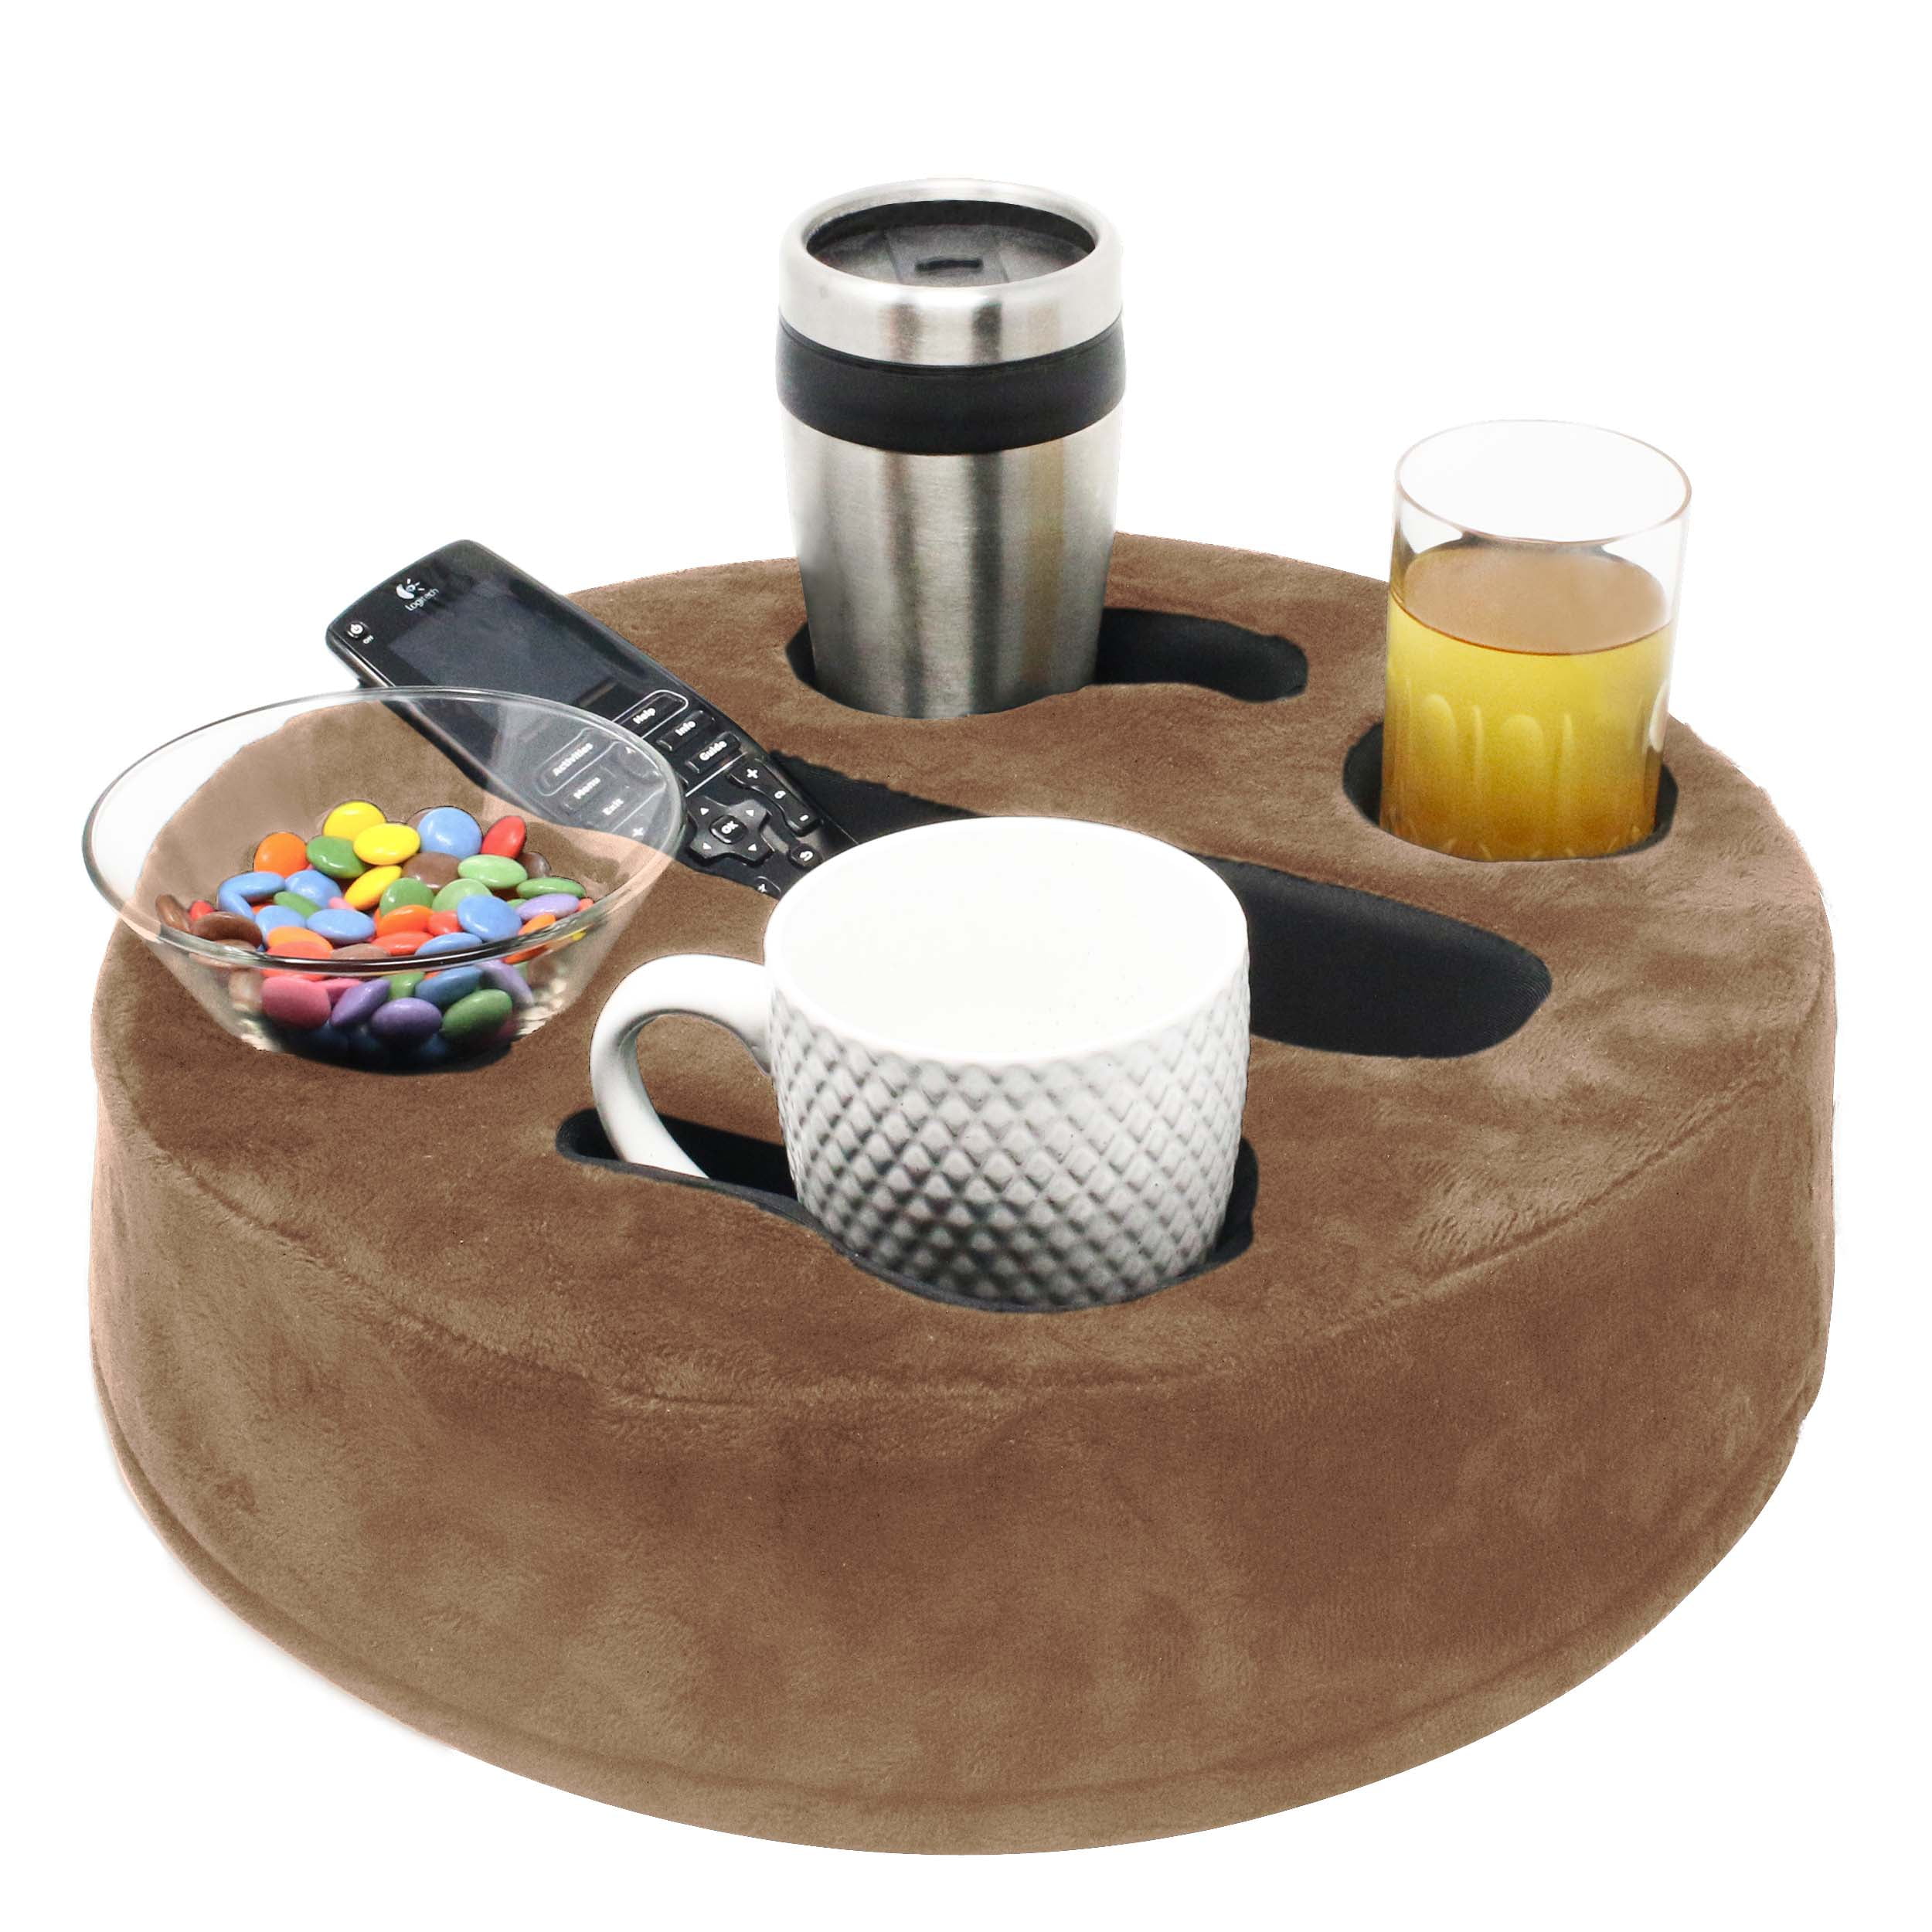 MOOKUNDY - Introducing Sofa Buddy - Convenient Couch Cup Holder, Couch  Caddy, Sofa Cup Holder. The Perfect Couch Accessory 